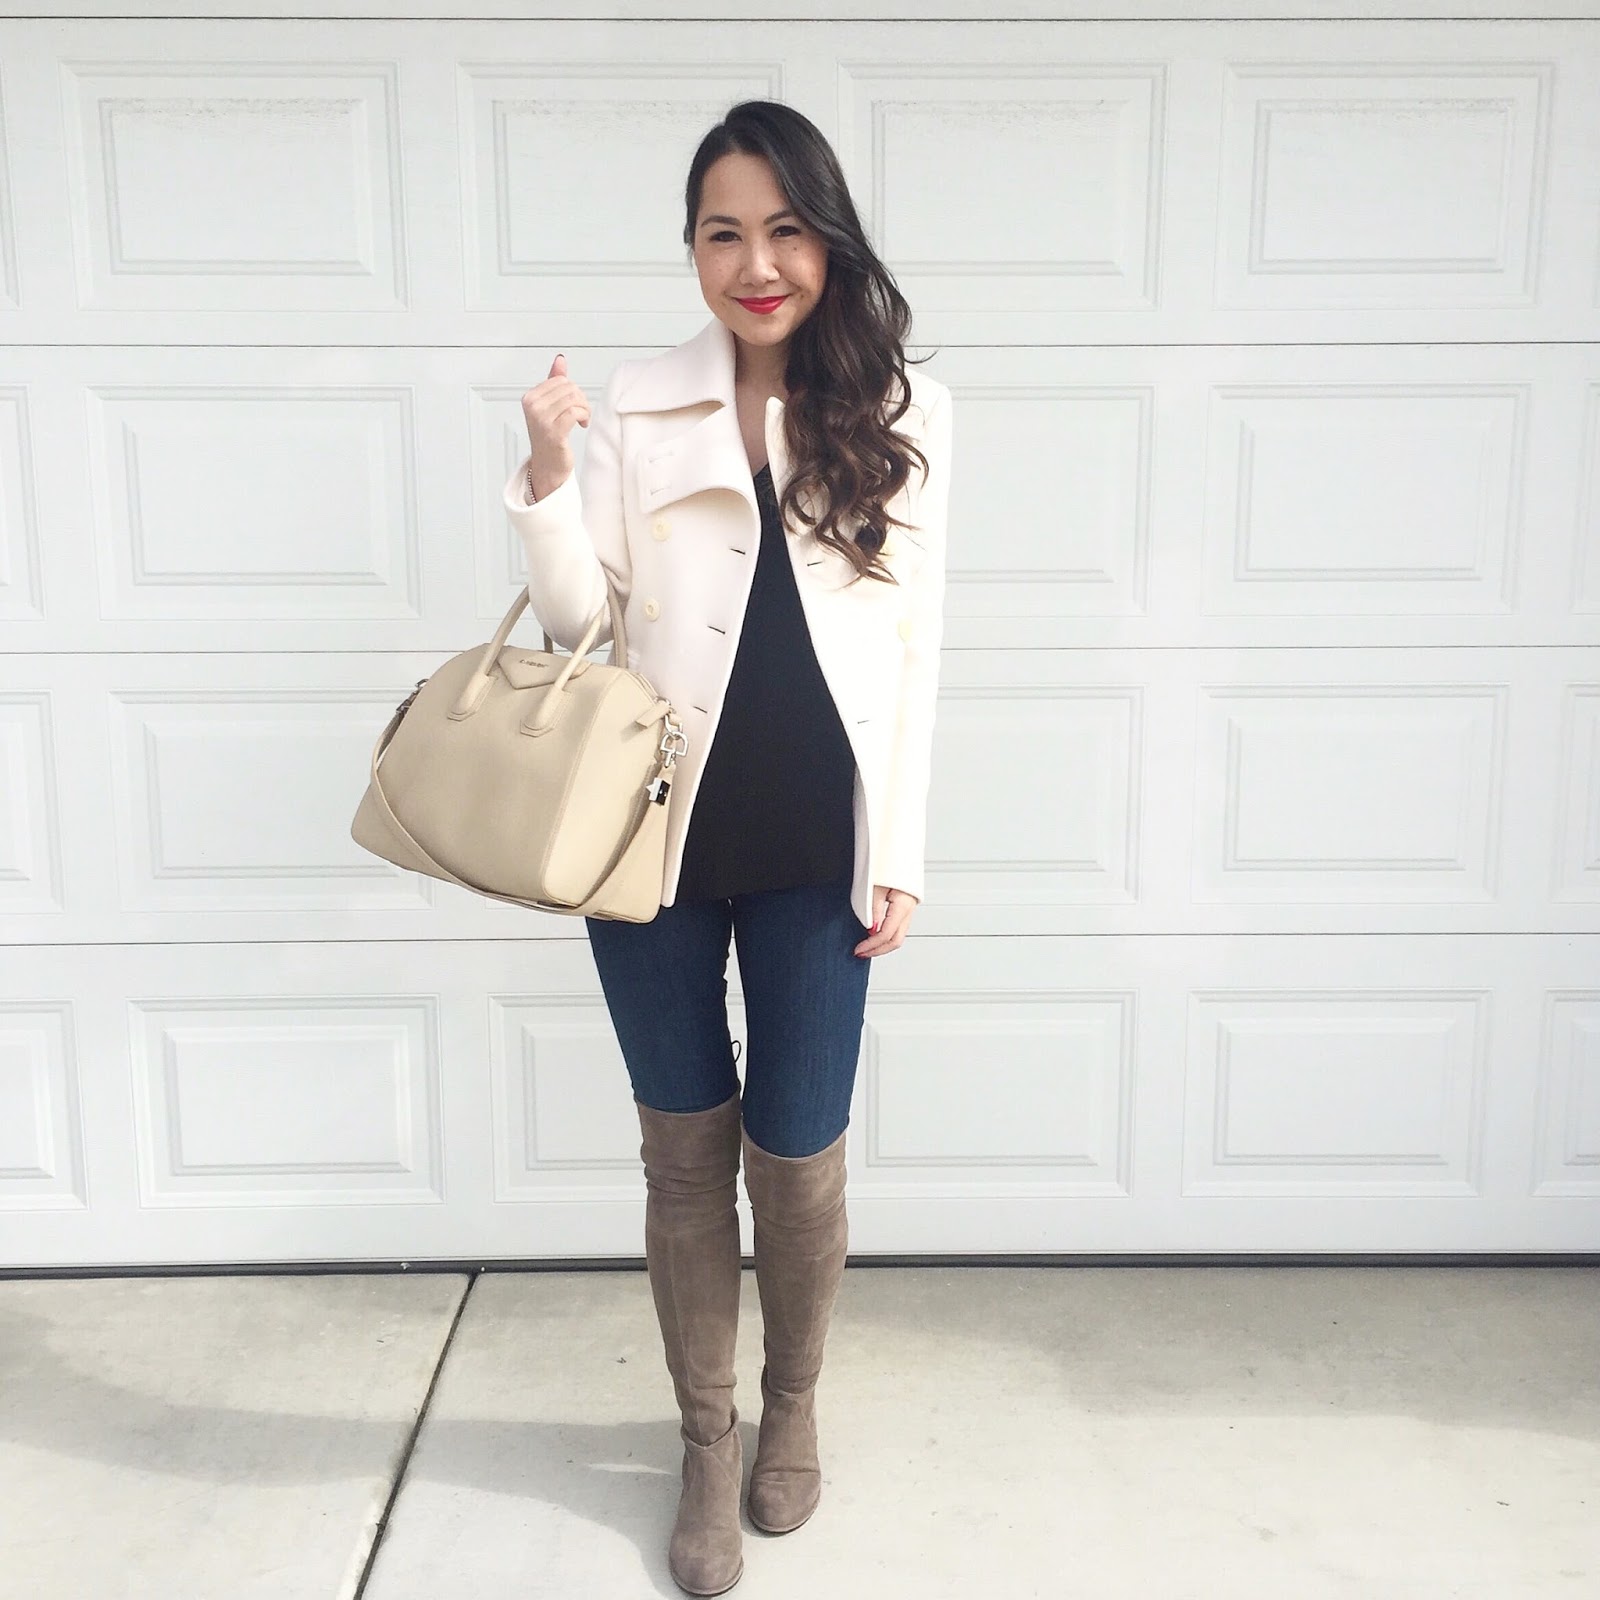 Workwear Winter Outfit  Neverfull mm outfit, Winter work wear, Louis  vuitton neverfull outfit